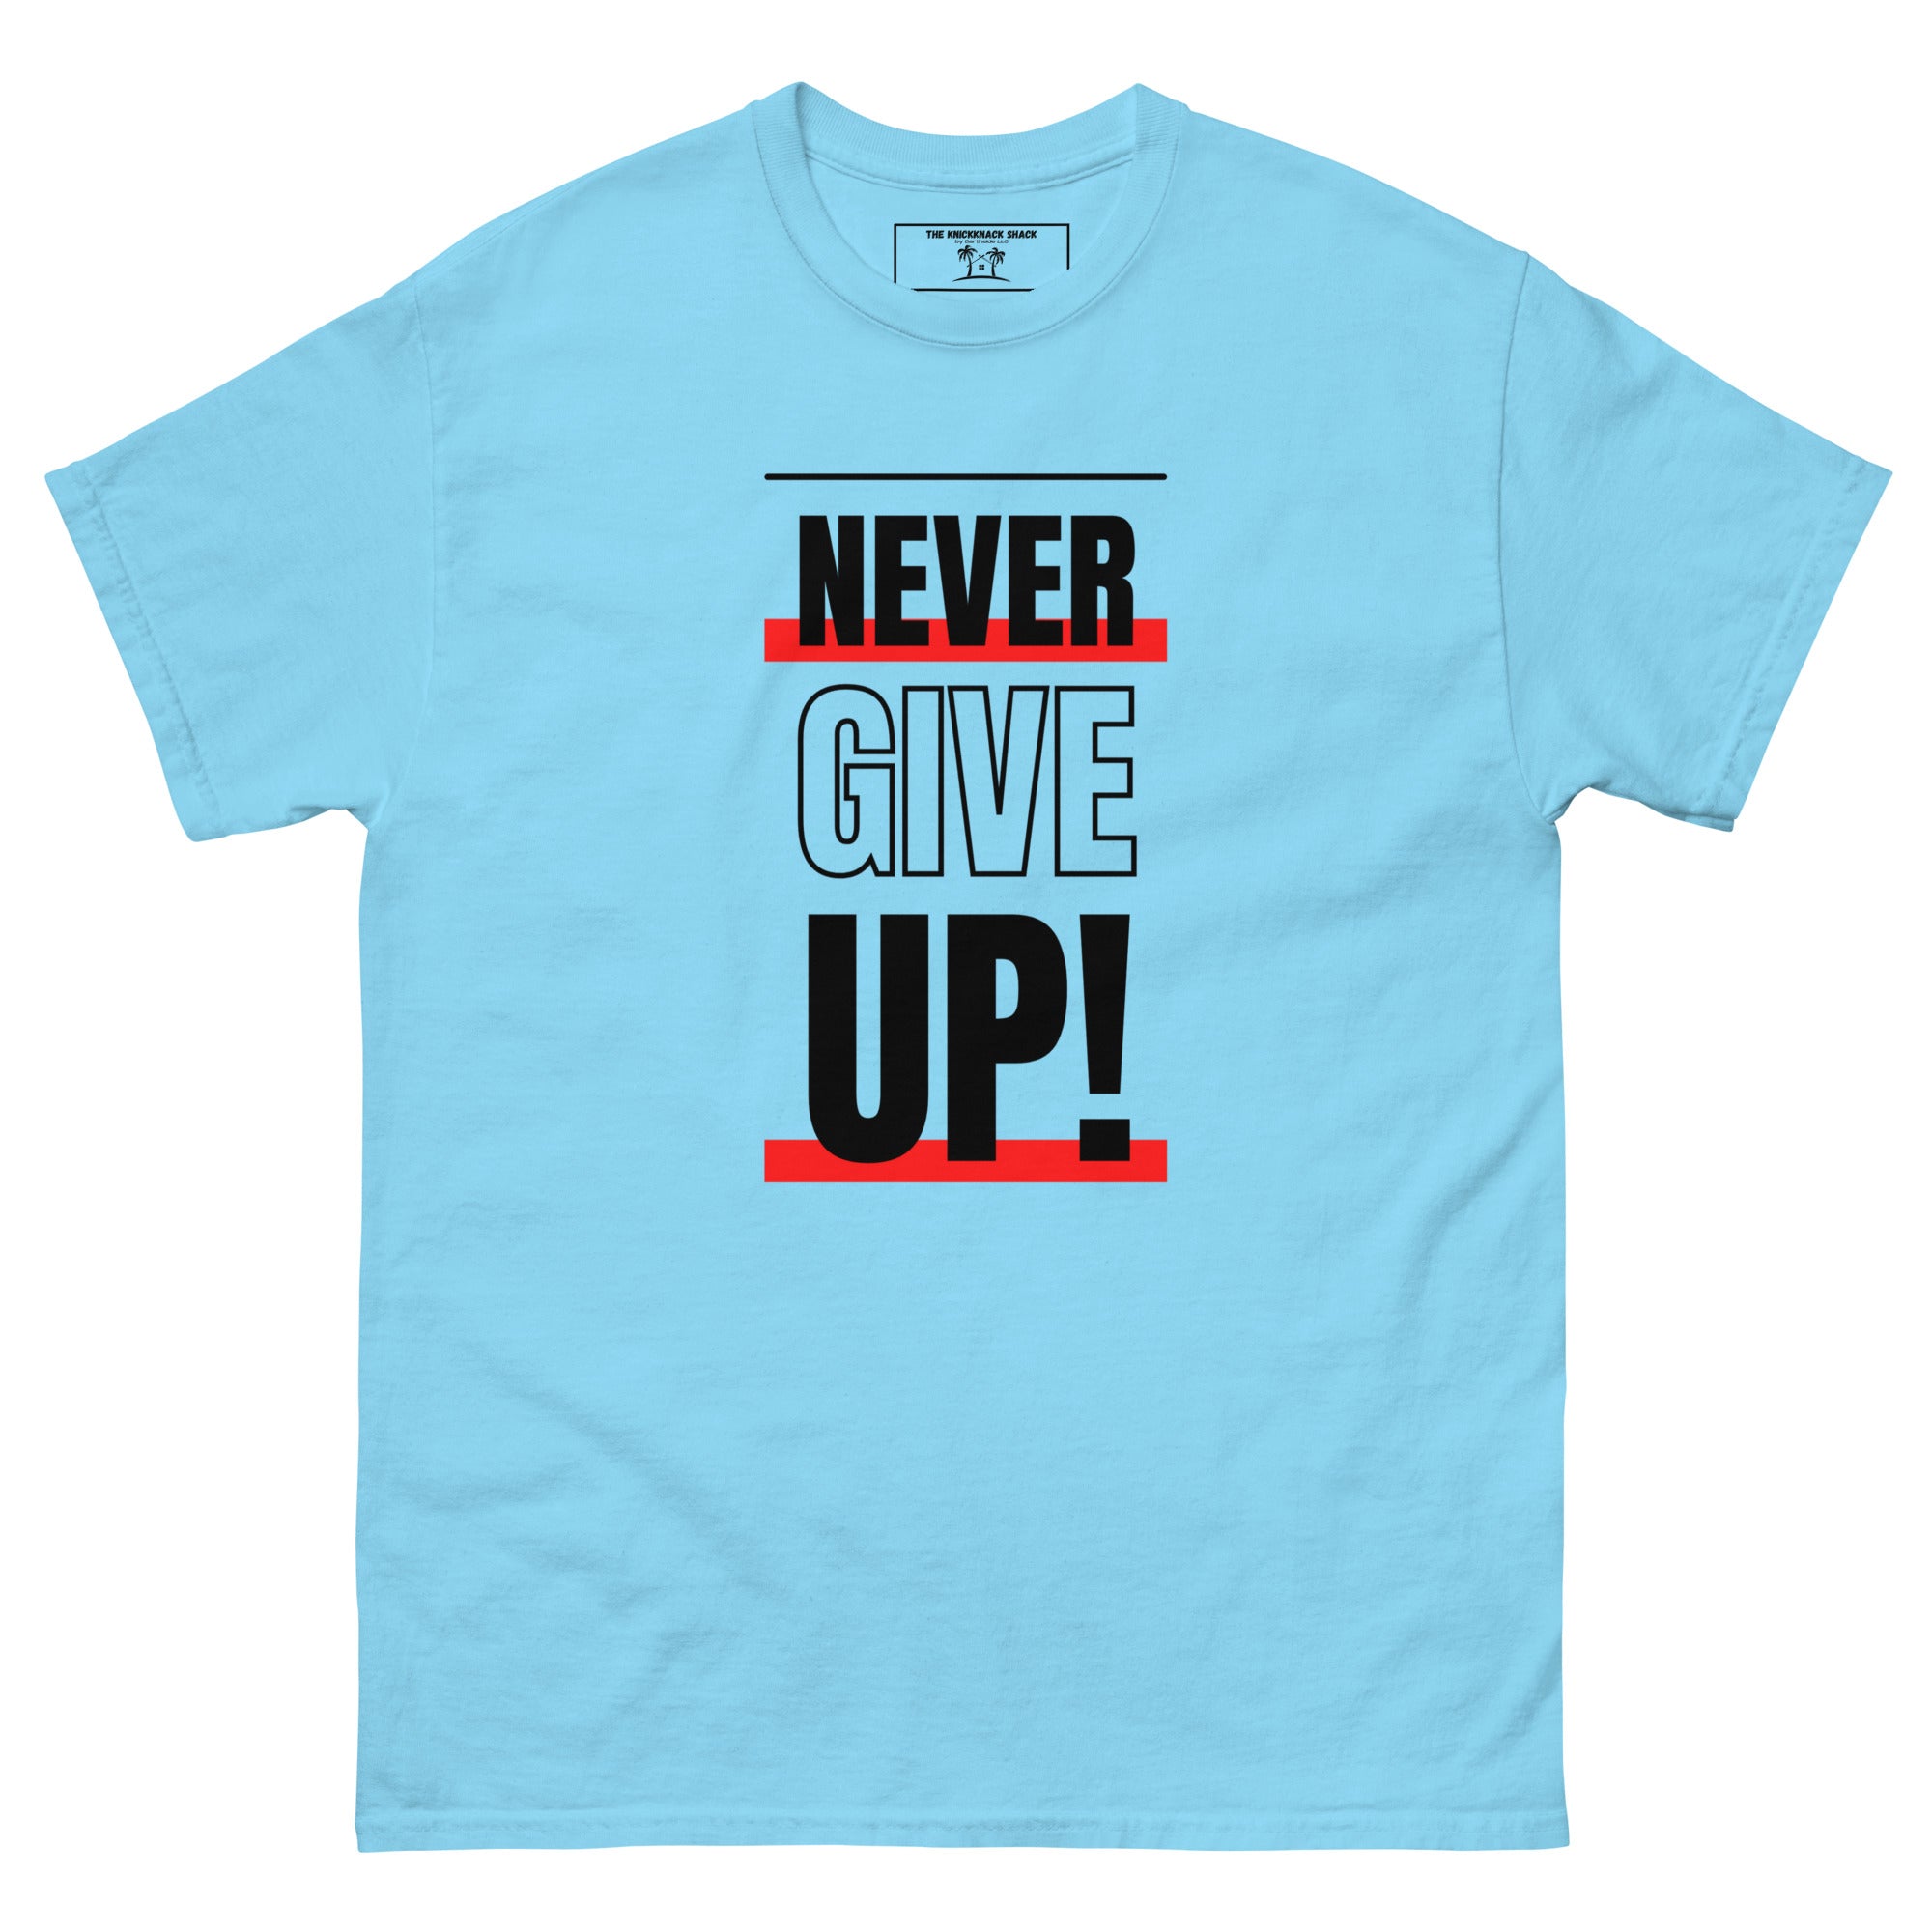 Classic Tee - Never Give Up (Light Colors)